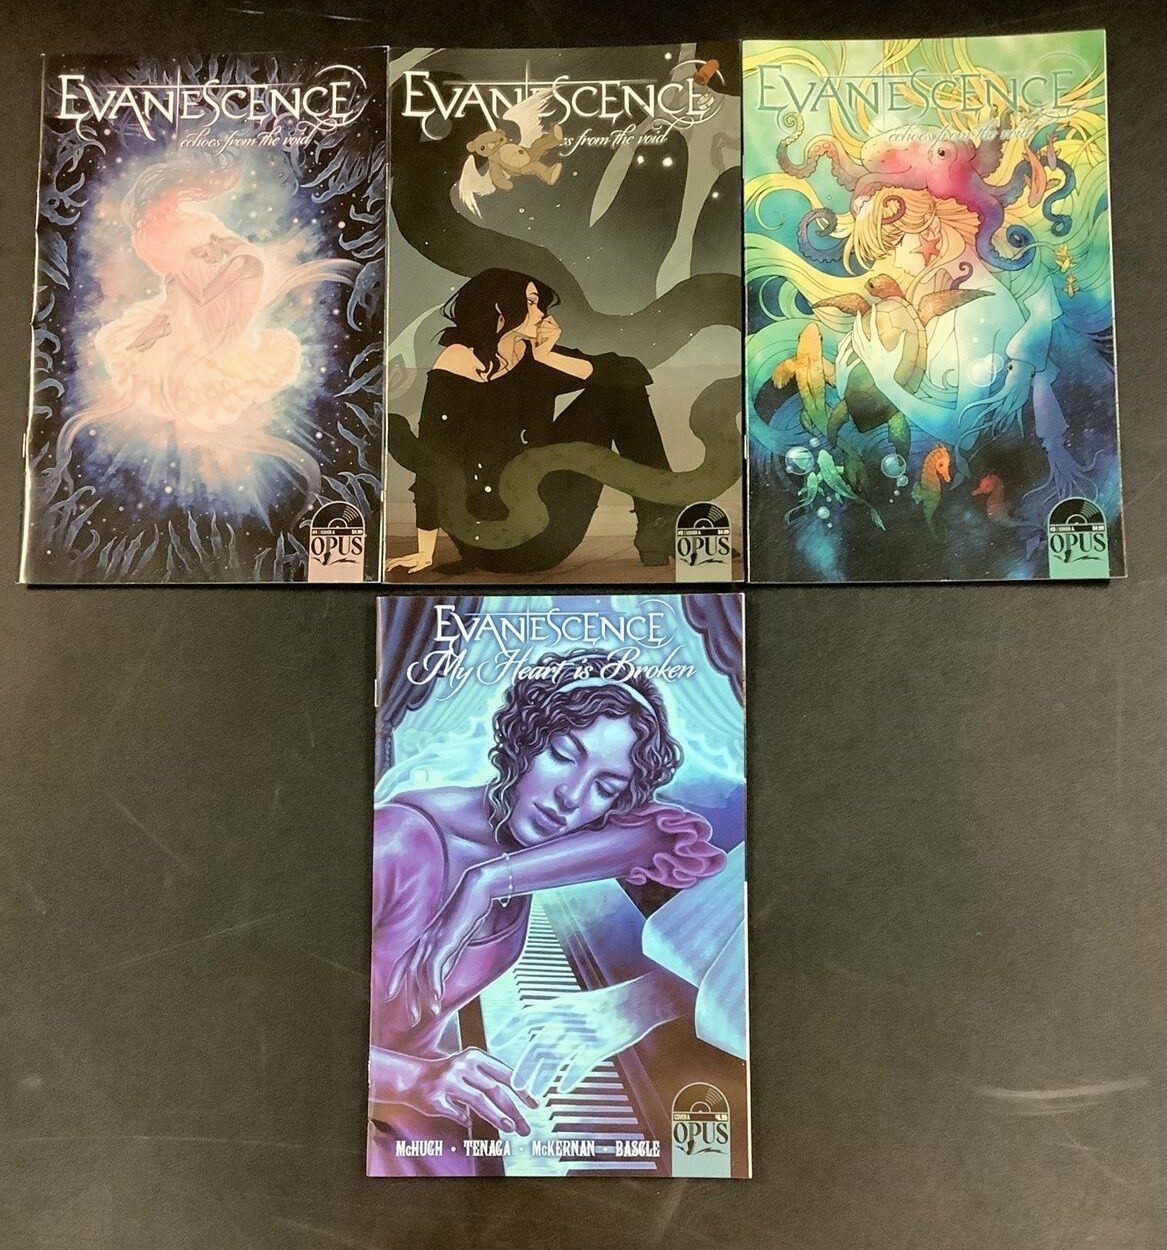 EVANESCENCE ECHOS FROM THE VOID #1-3 MY HEART IS BROKEN #0 FULL COMIC BOOK LOT